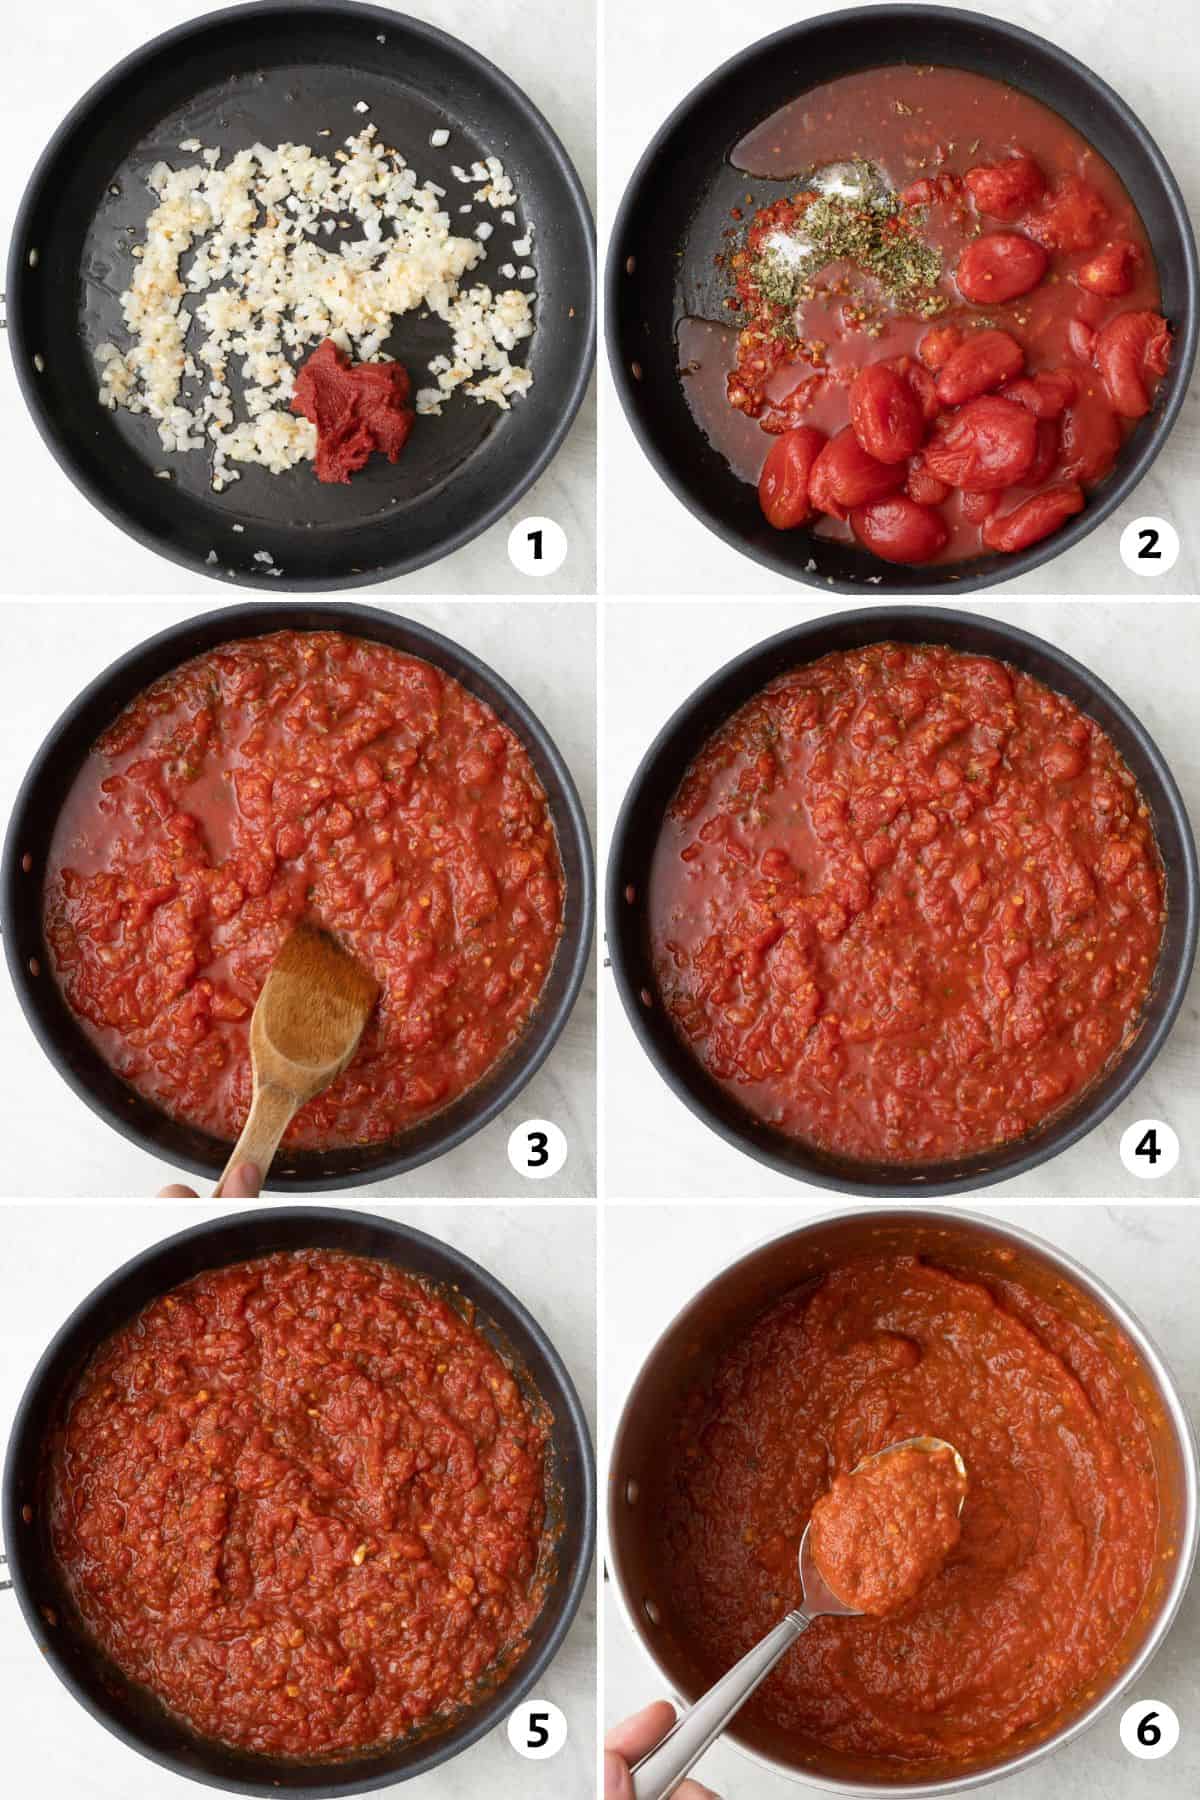 6 image collage making recipe: onions and garlic after cooking with tomato paste adding, 2- tomatoes and seasonings added, 3- wooden spoon breaking tomatoes into small bits, 4- before simmering, 5- after simmering, 6- after pureed and thickened.